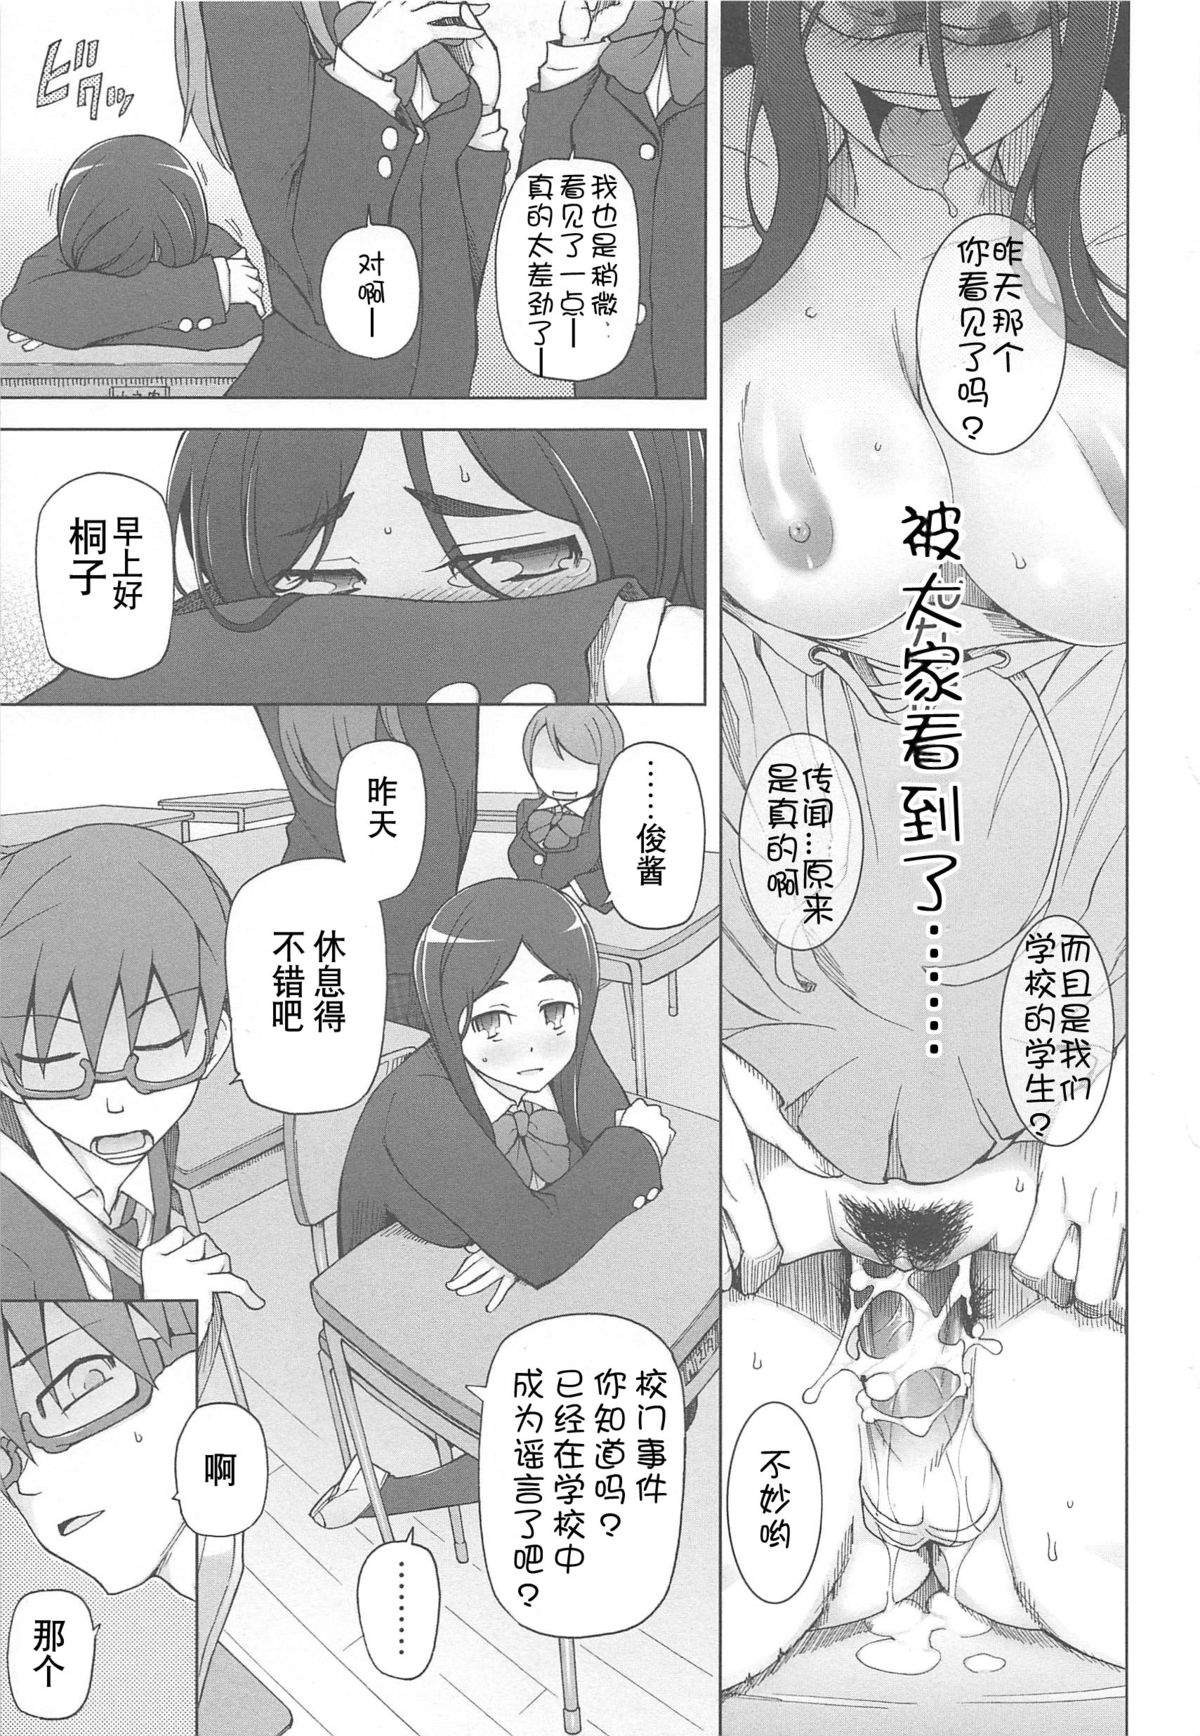 [Miito Shido] LUSTFUL BERRY Ch. 4 [Chinese] [joungpig个人汉化] page 1 full